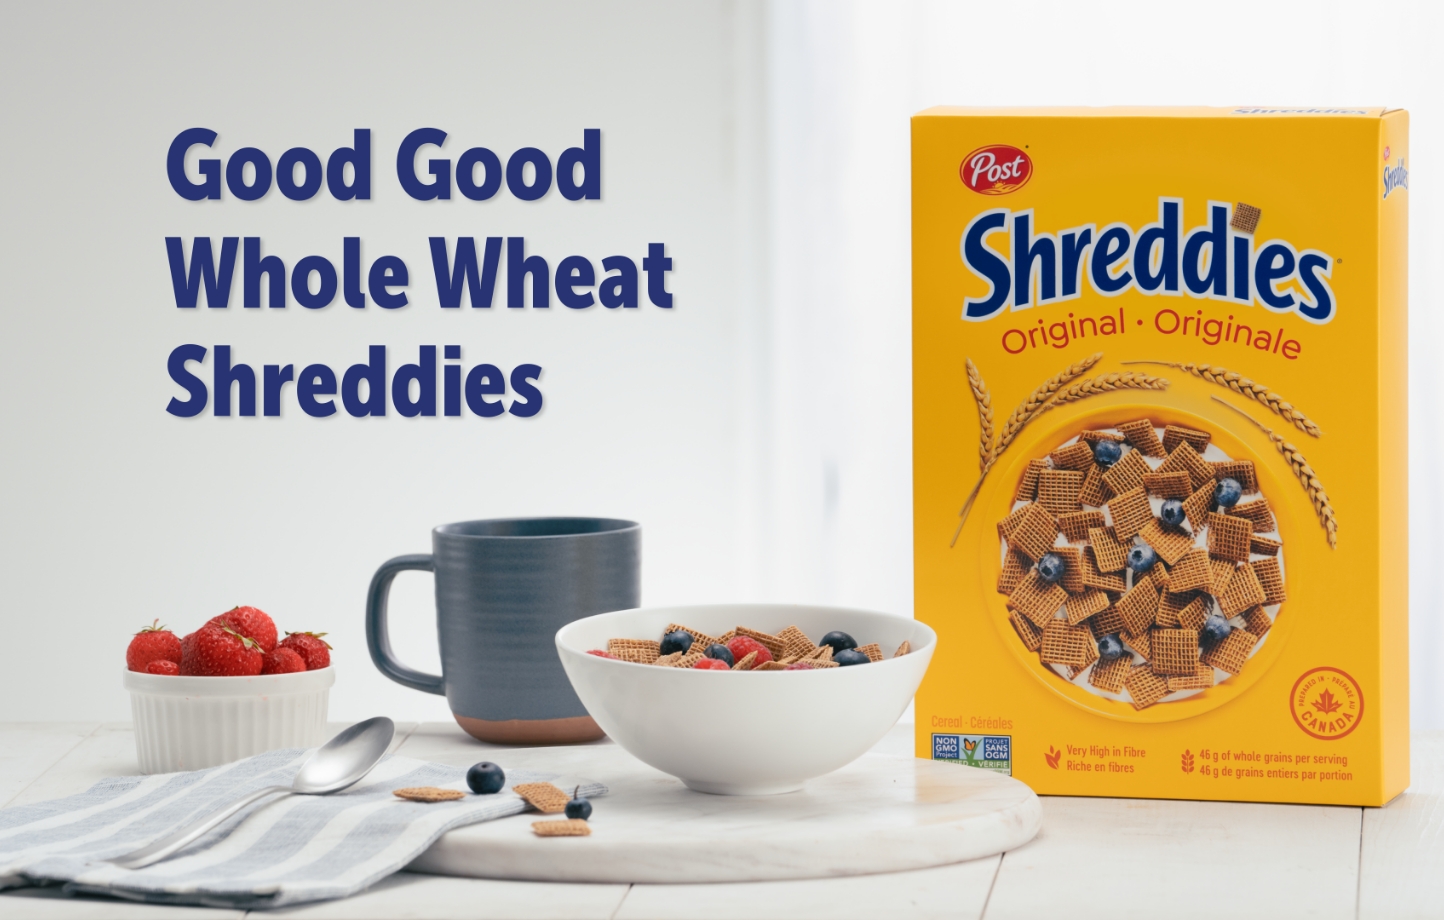 "Good Good Whole Wheat Shreddies" Original Shreddies box sitting on a table with a bowl of cereal with fruit, and a coffee.